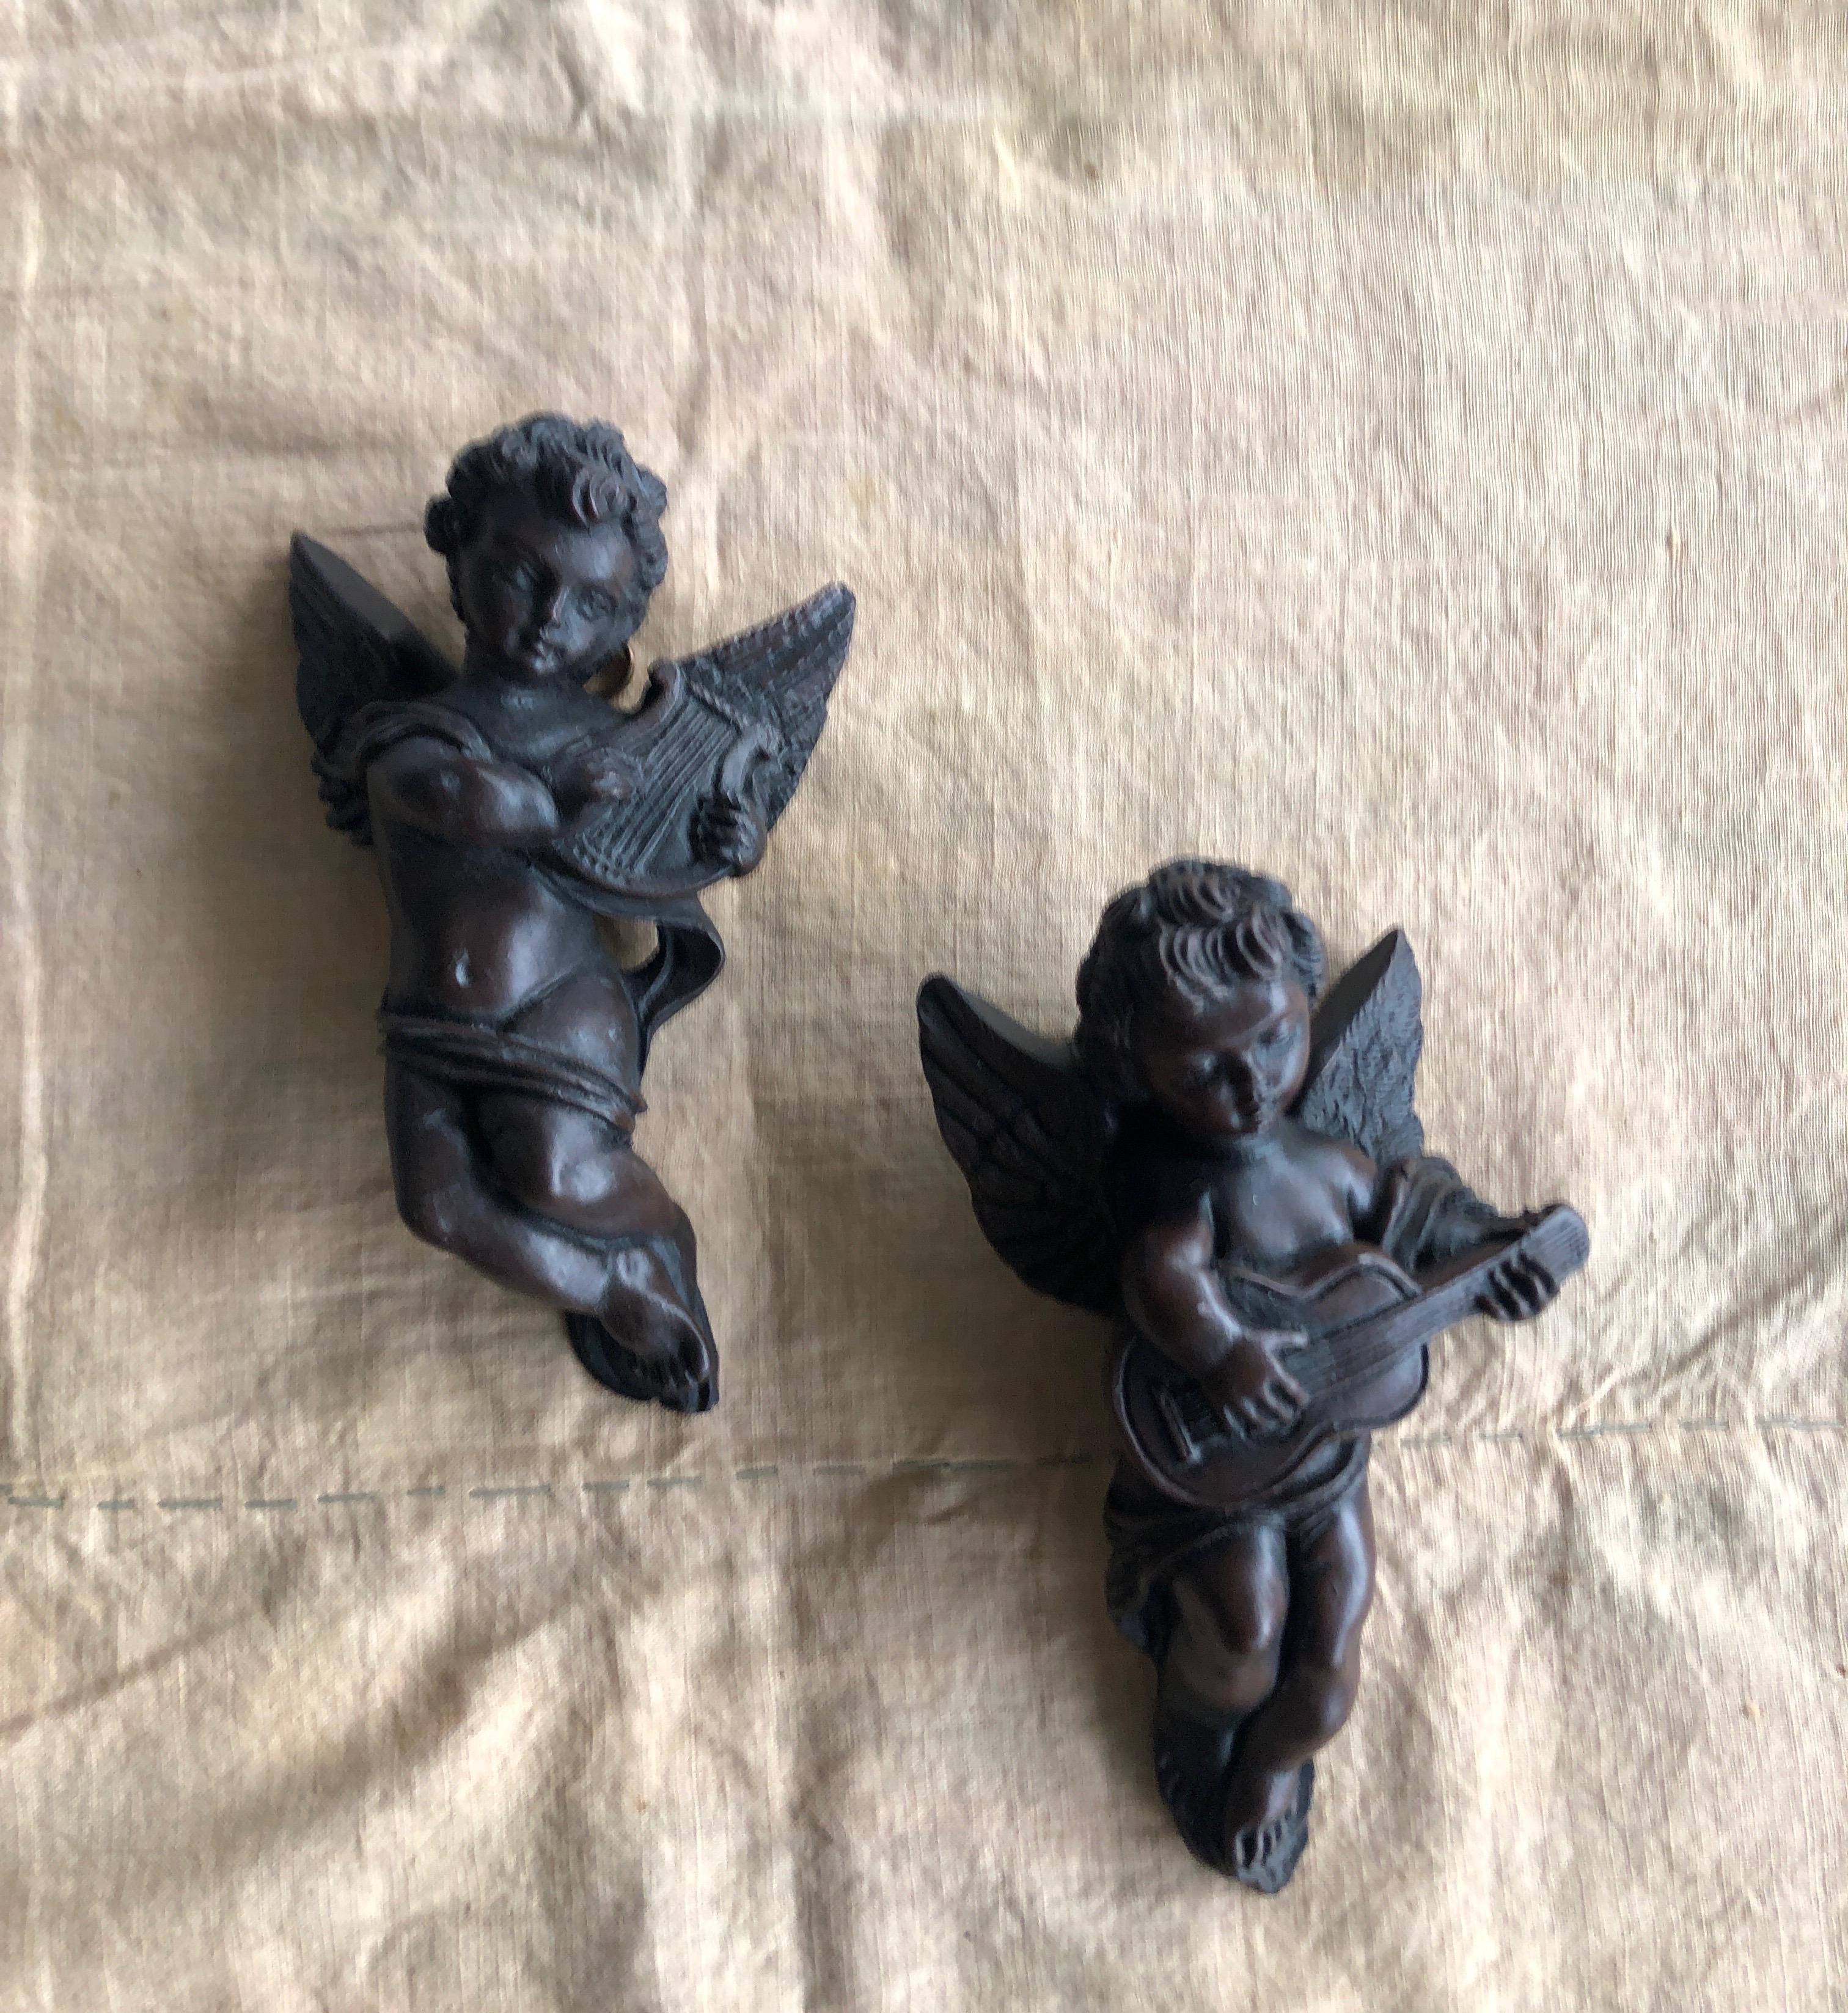 Pair of Brown Cherubs Holiday Ornaments with Hook in the back.
Size: 5.5 x 3 x 1.